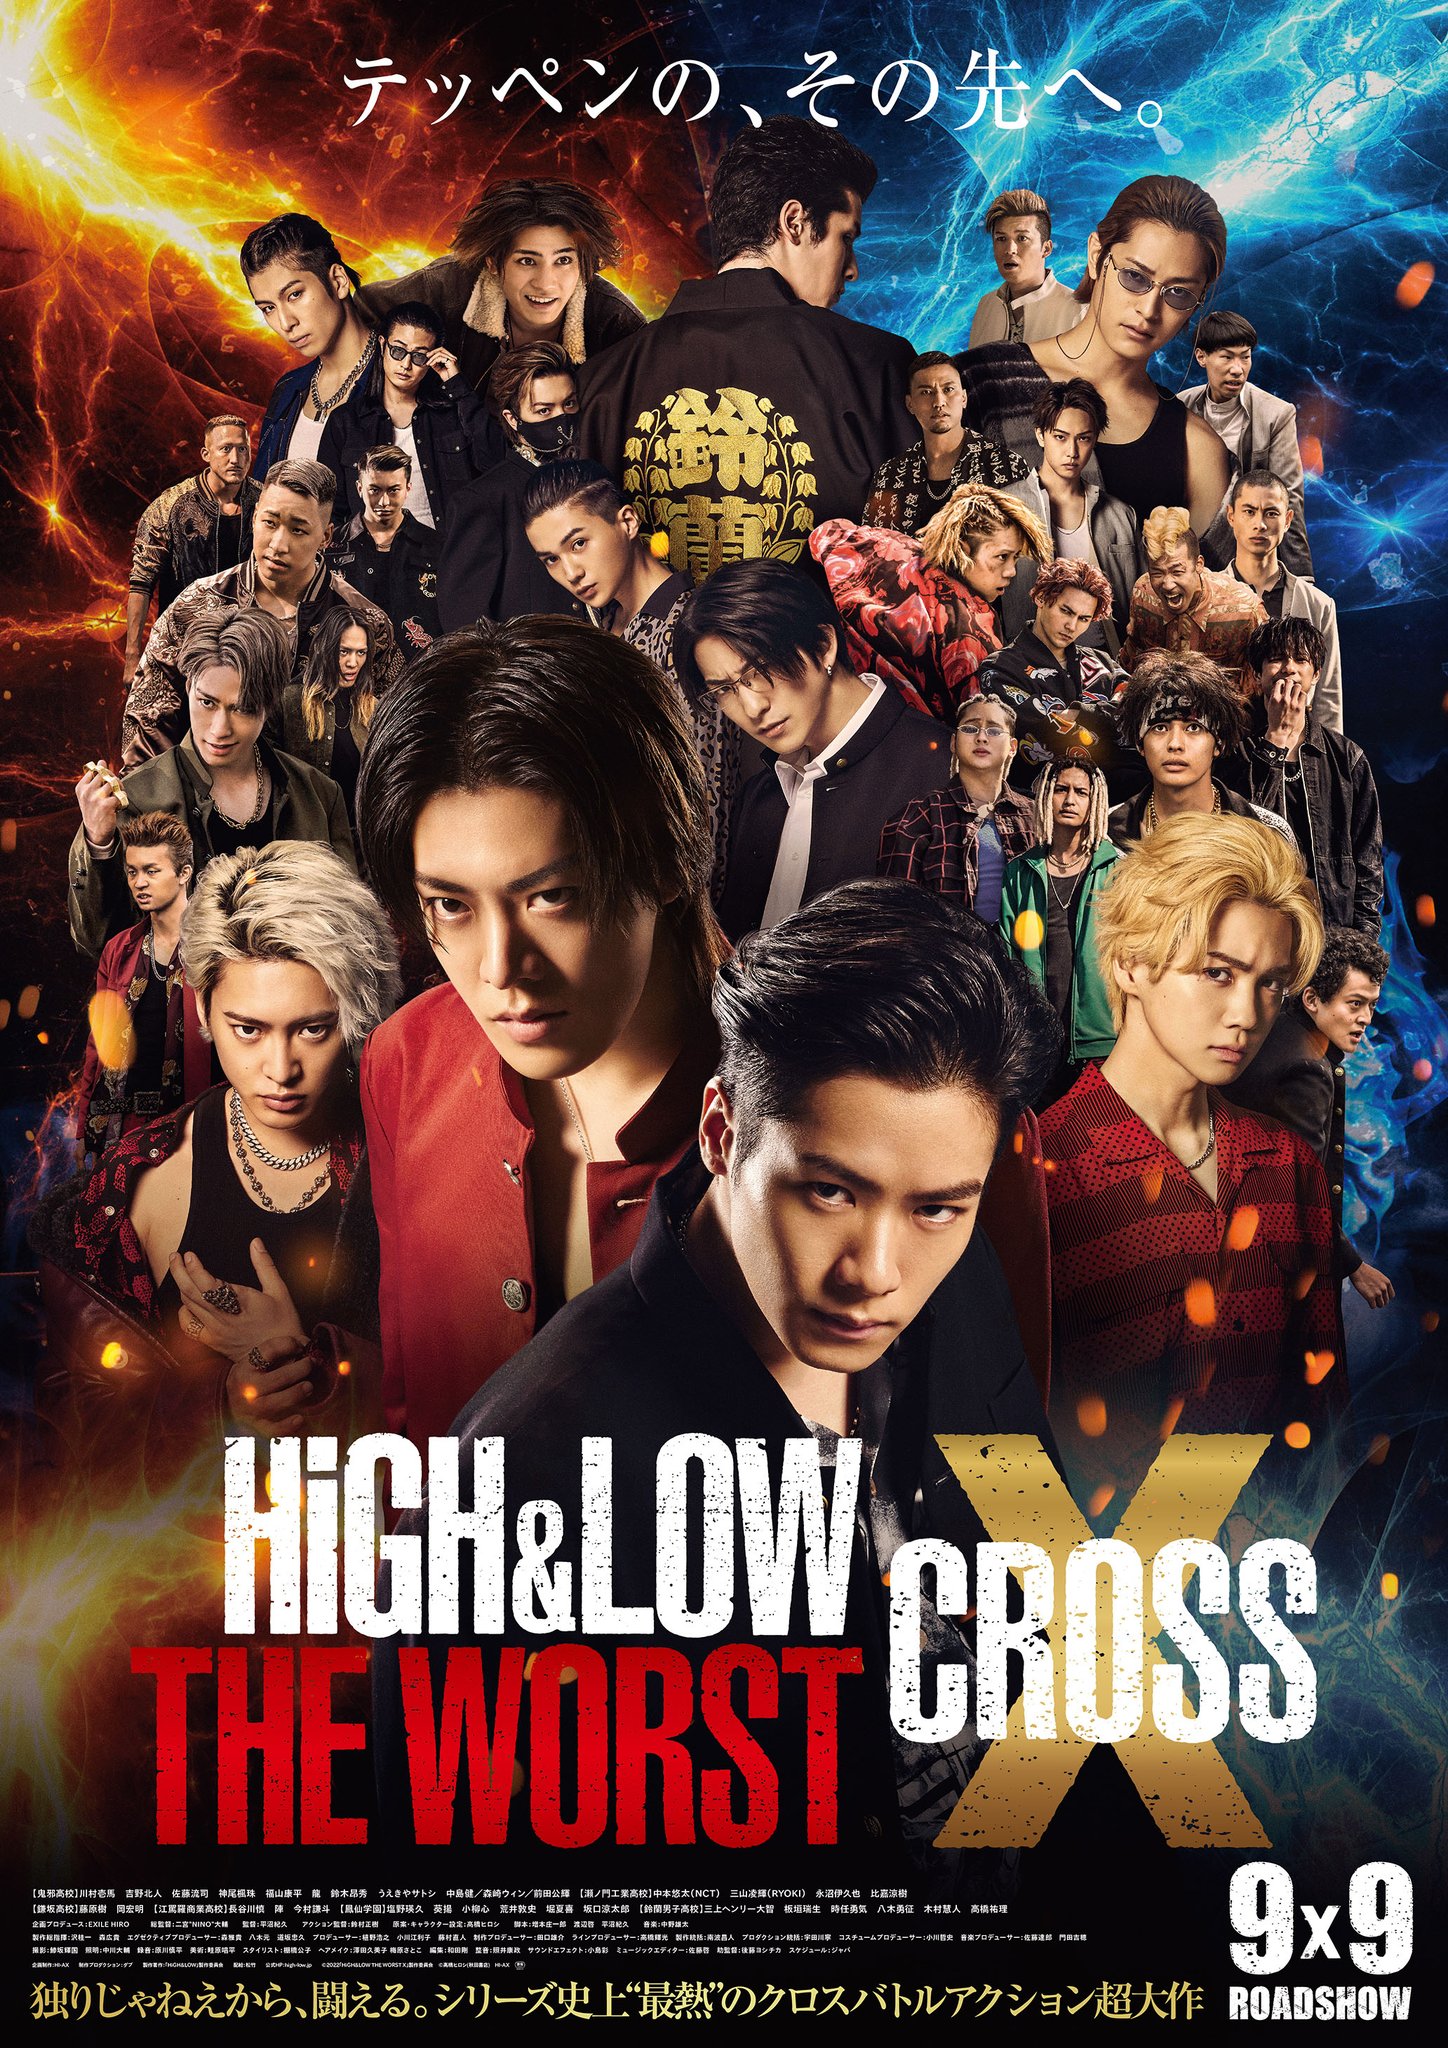 High & low the worst cross x